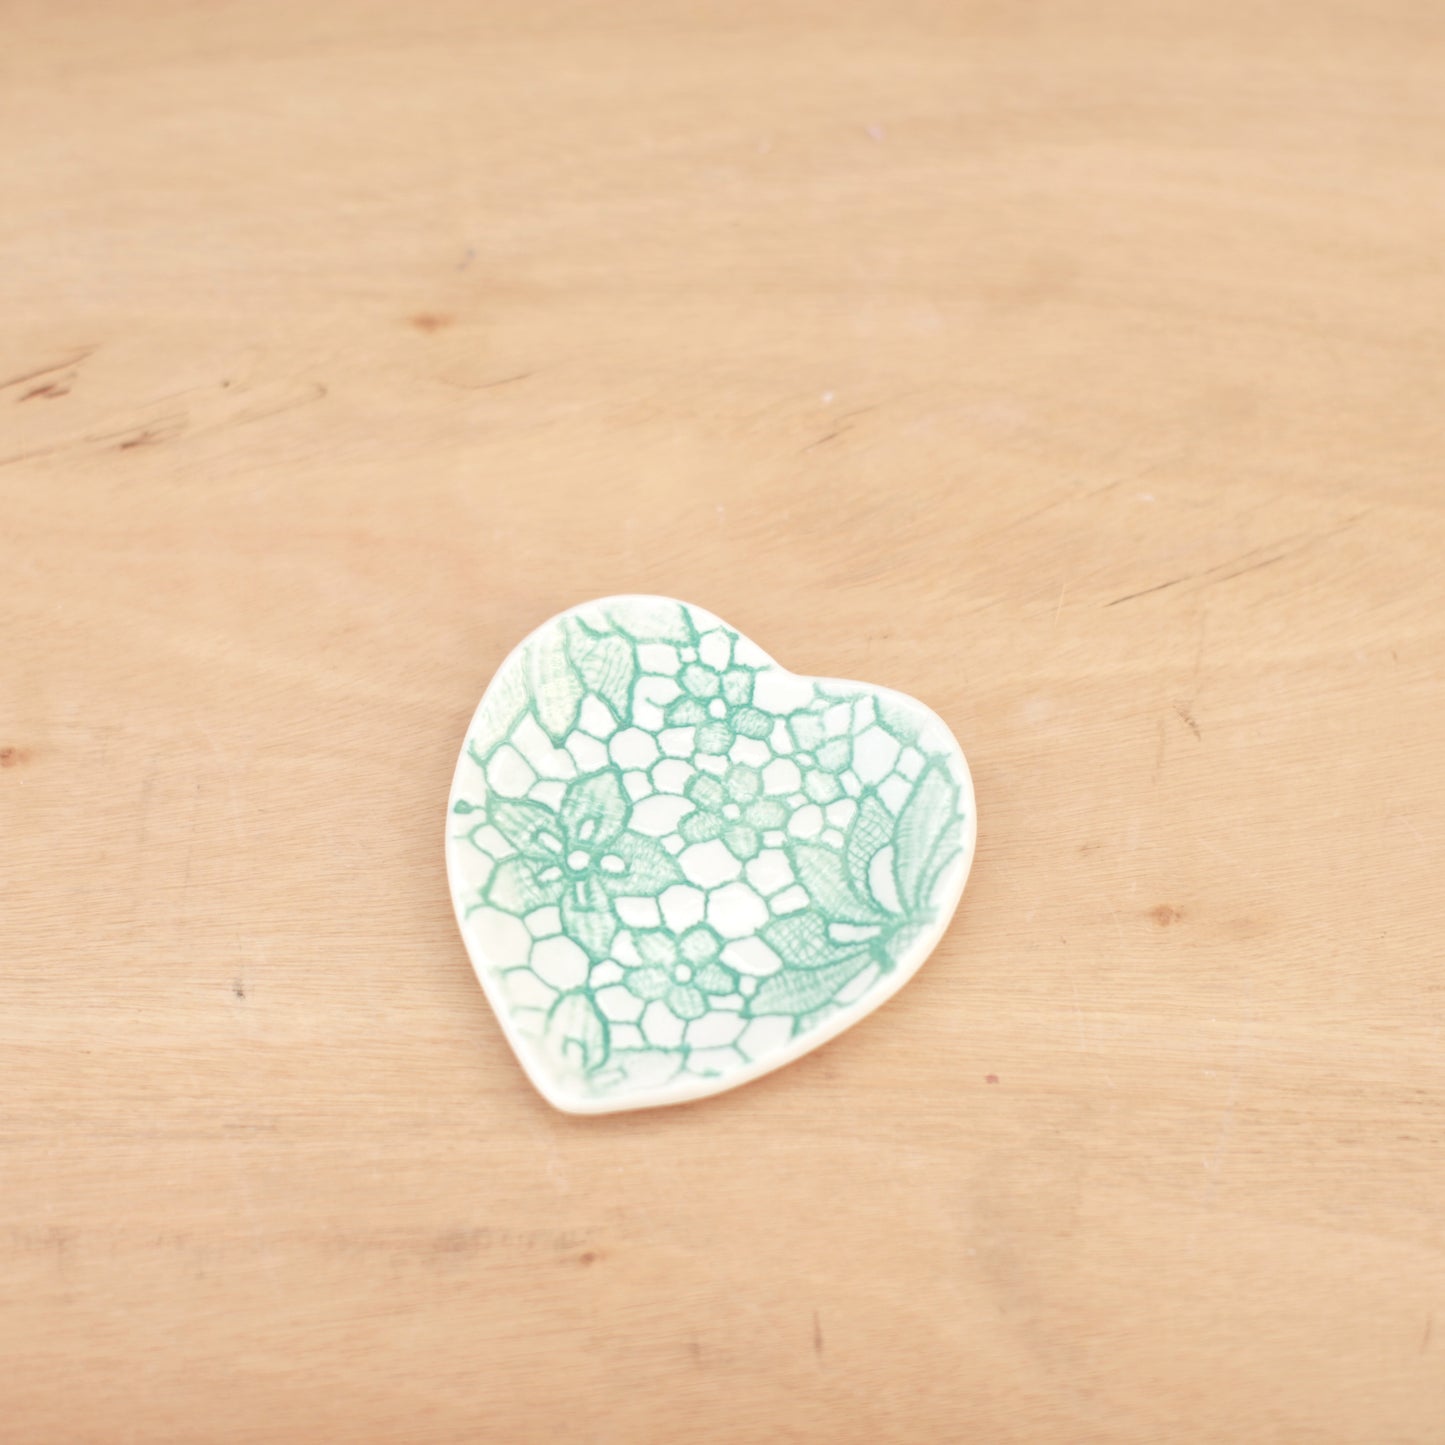 Pressed Lace Heart Ring Dish